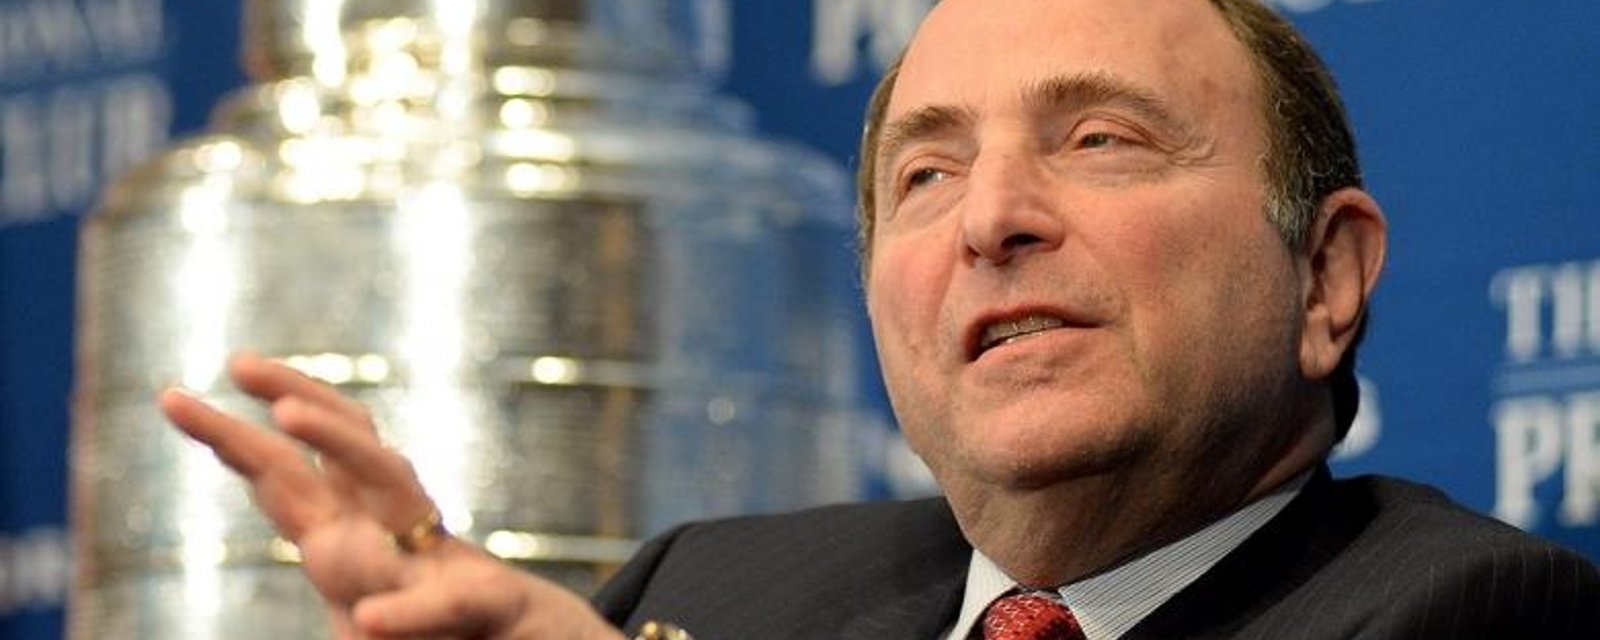 Gary Bettman responds to rumors of relocation for the Hurricanes.